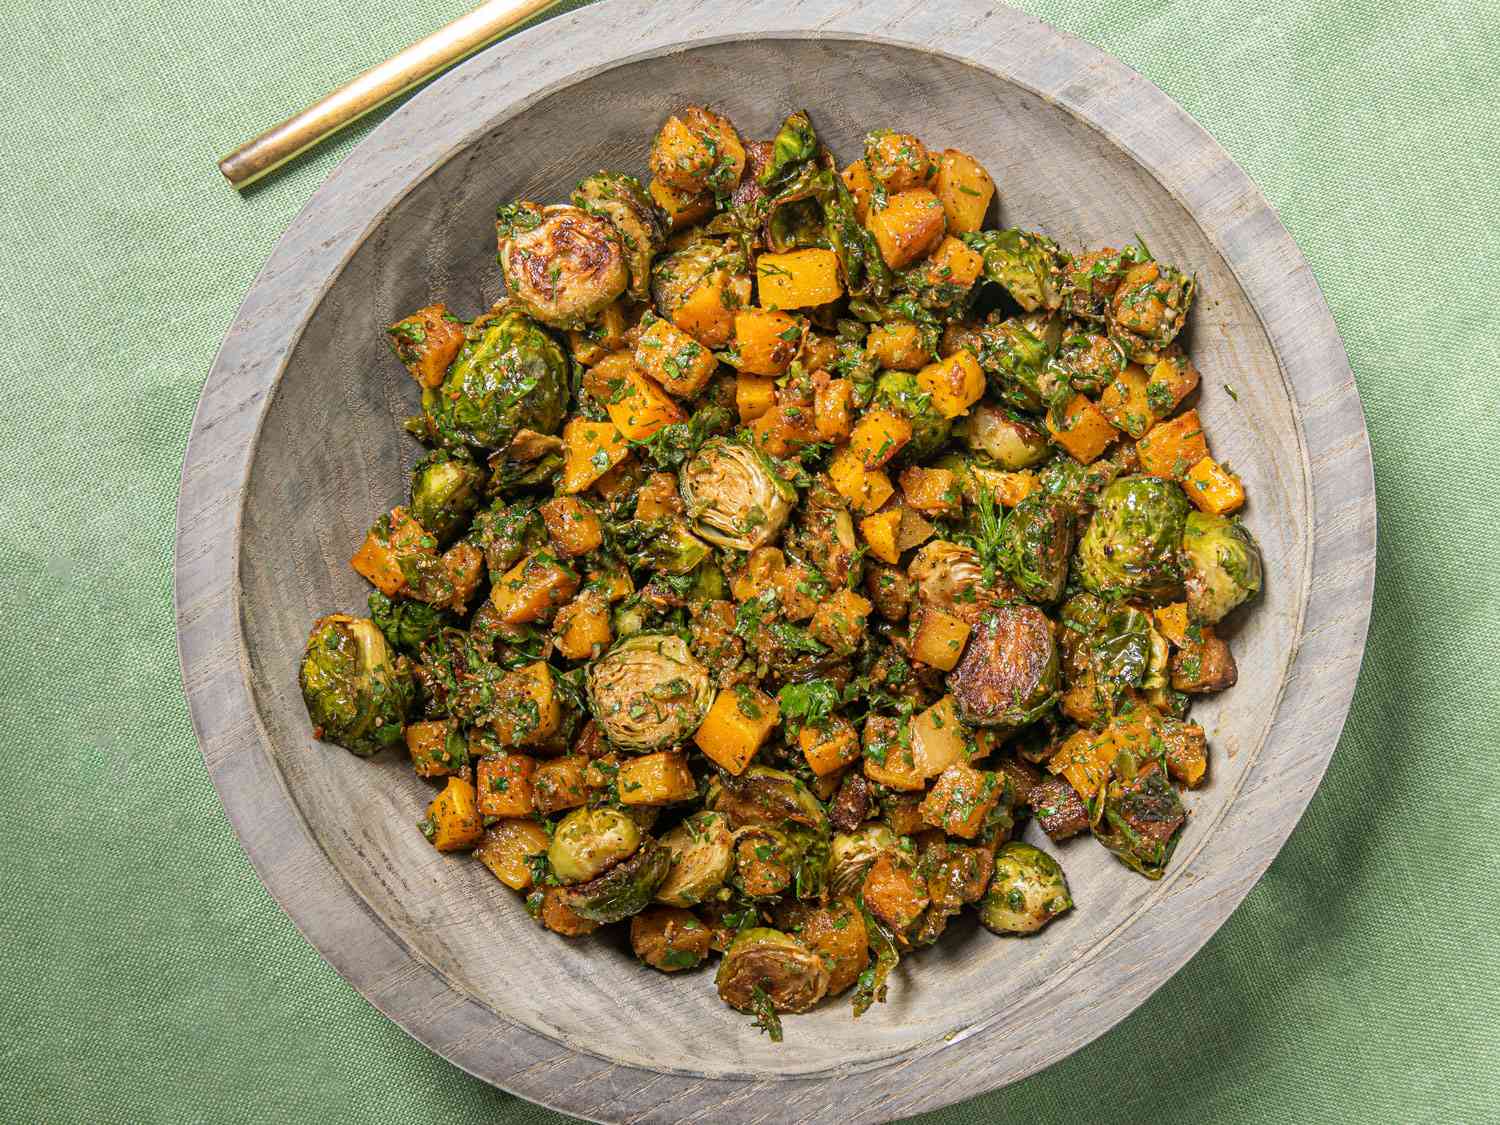 Brussel sprouts and butternut squash salad